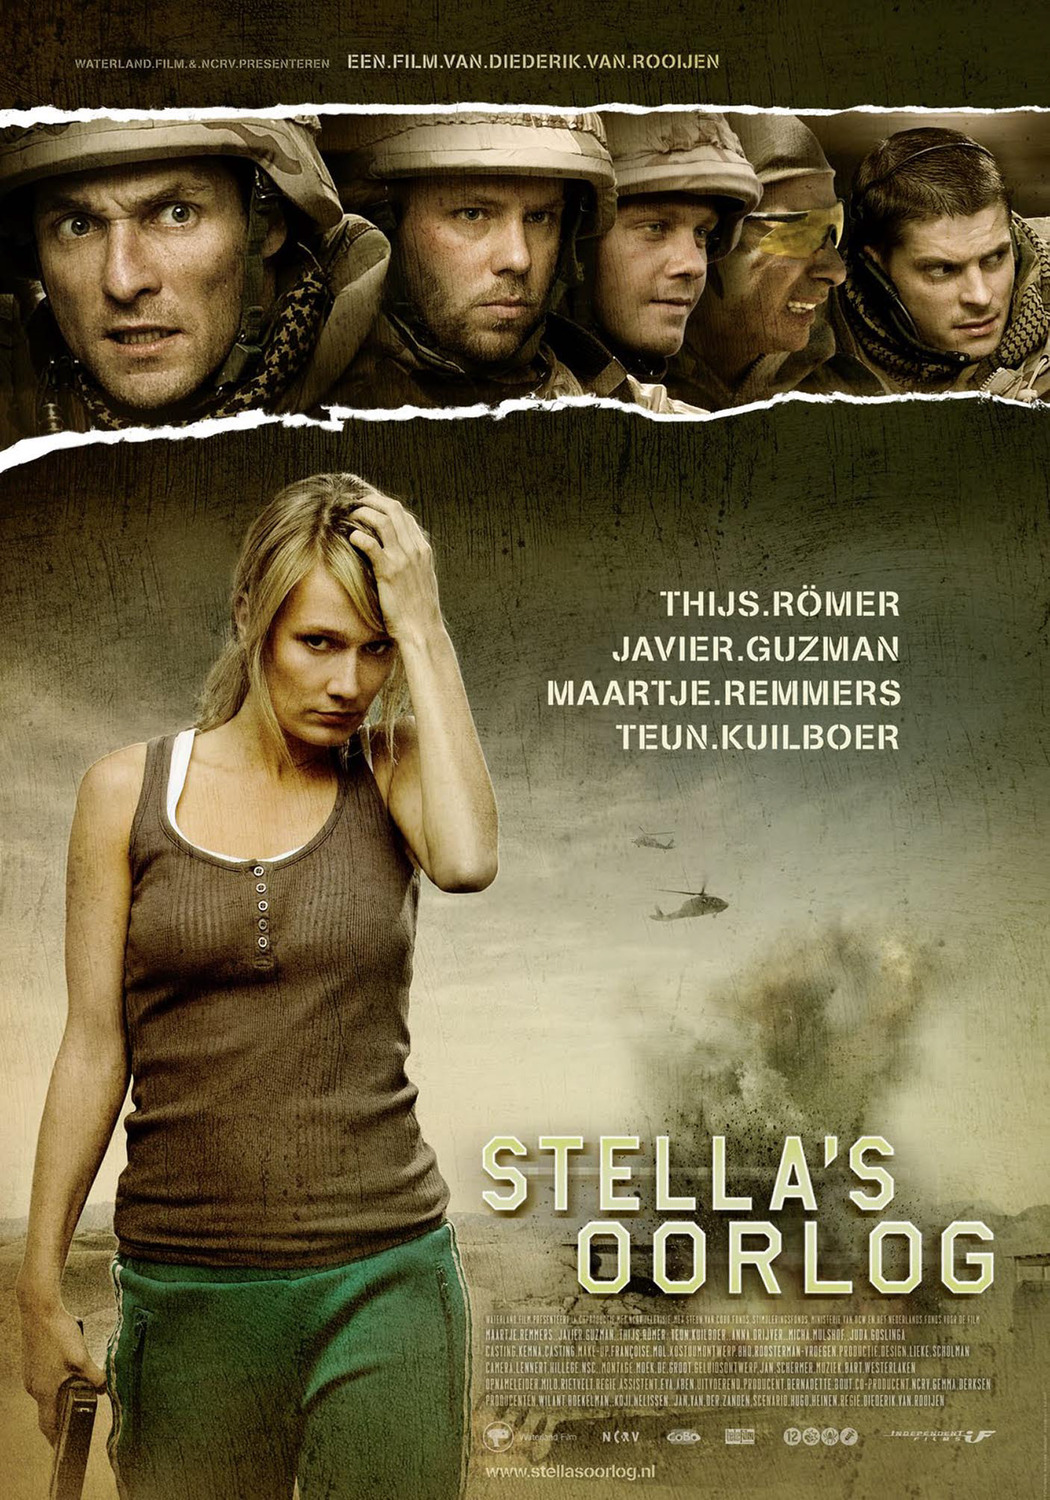 Extra Large Movie Poster Image for Stella's oorlog (#2 of 2)